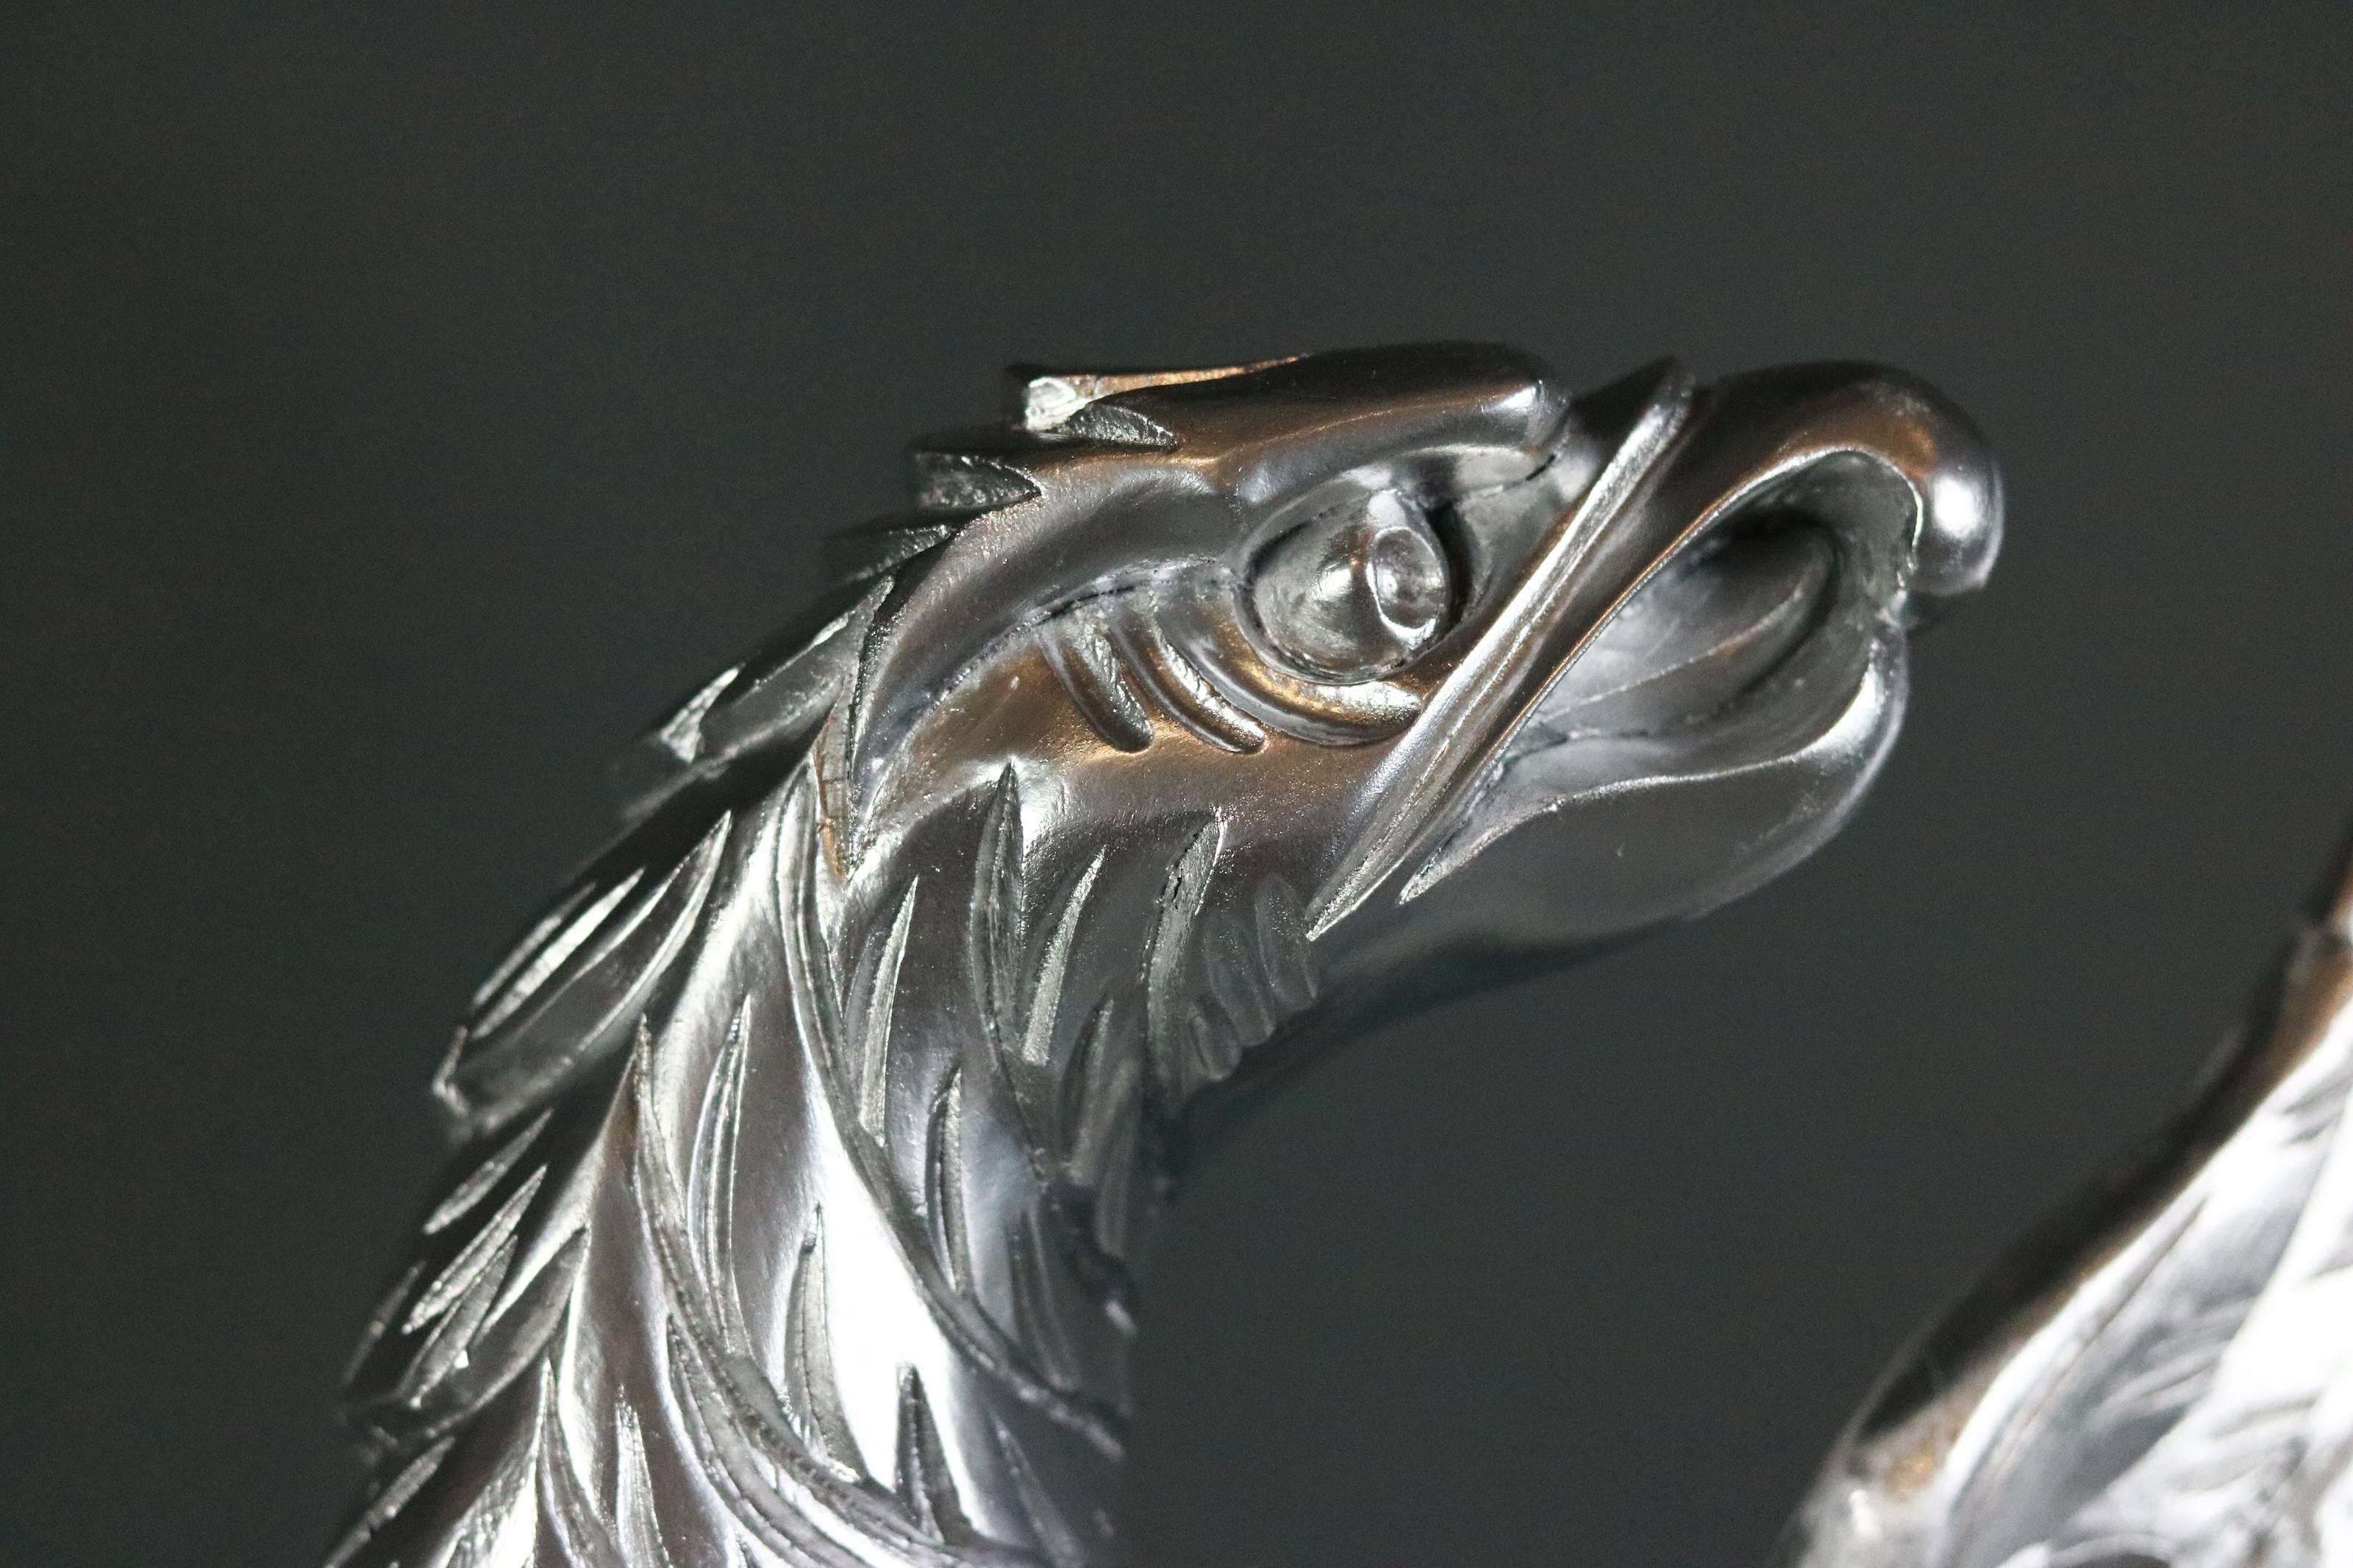 Carved wooden eagle painted silver. Eagle is very detailed and clutching the great seal in the likeness of the US Coat of Arms.

Rear hanging wire.

Measures: 19